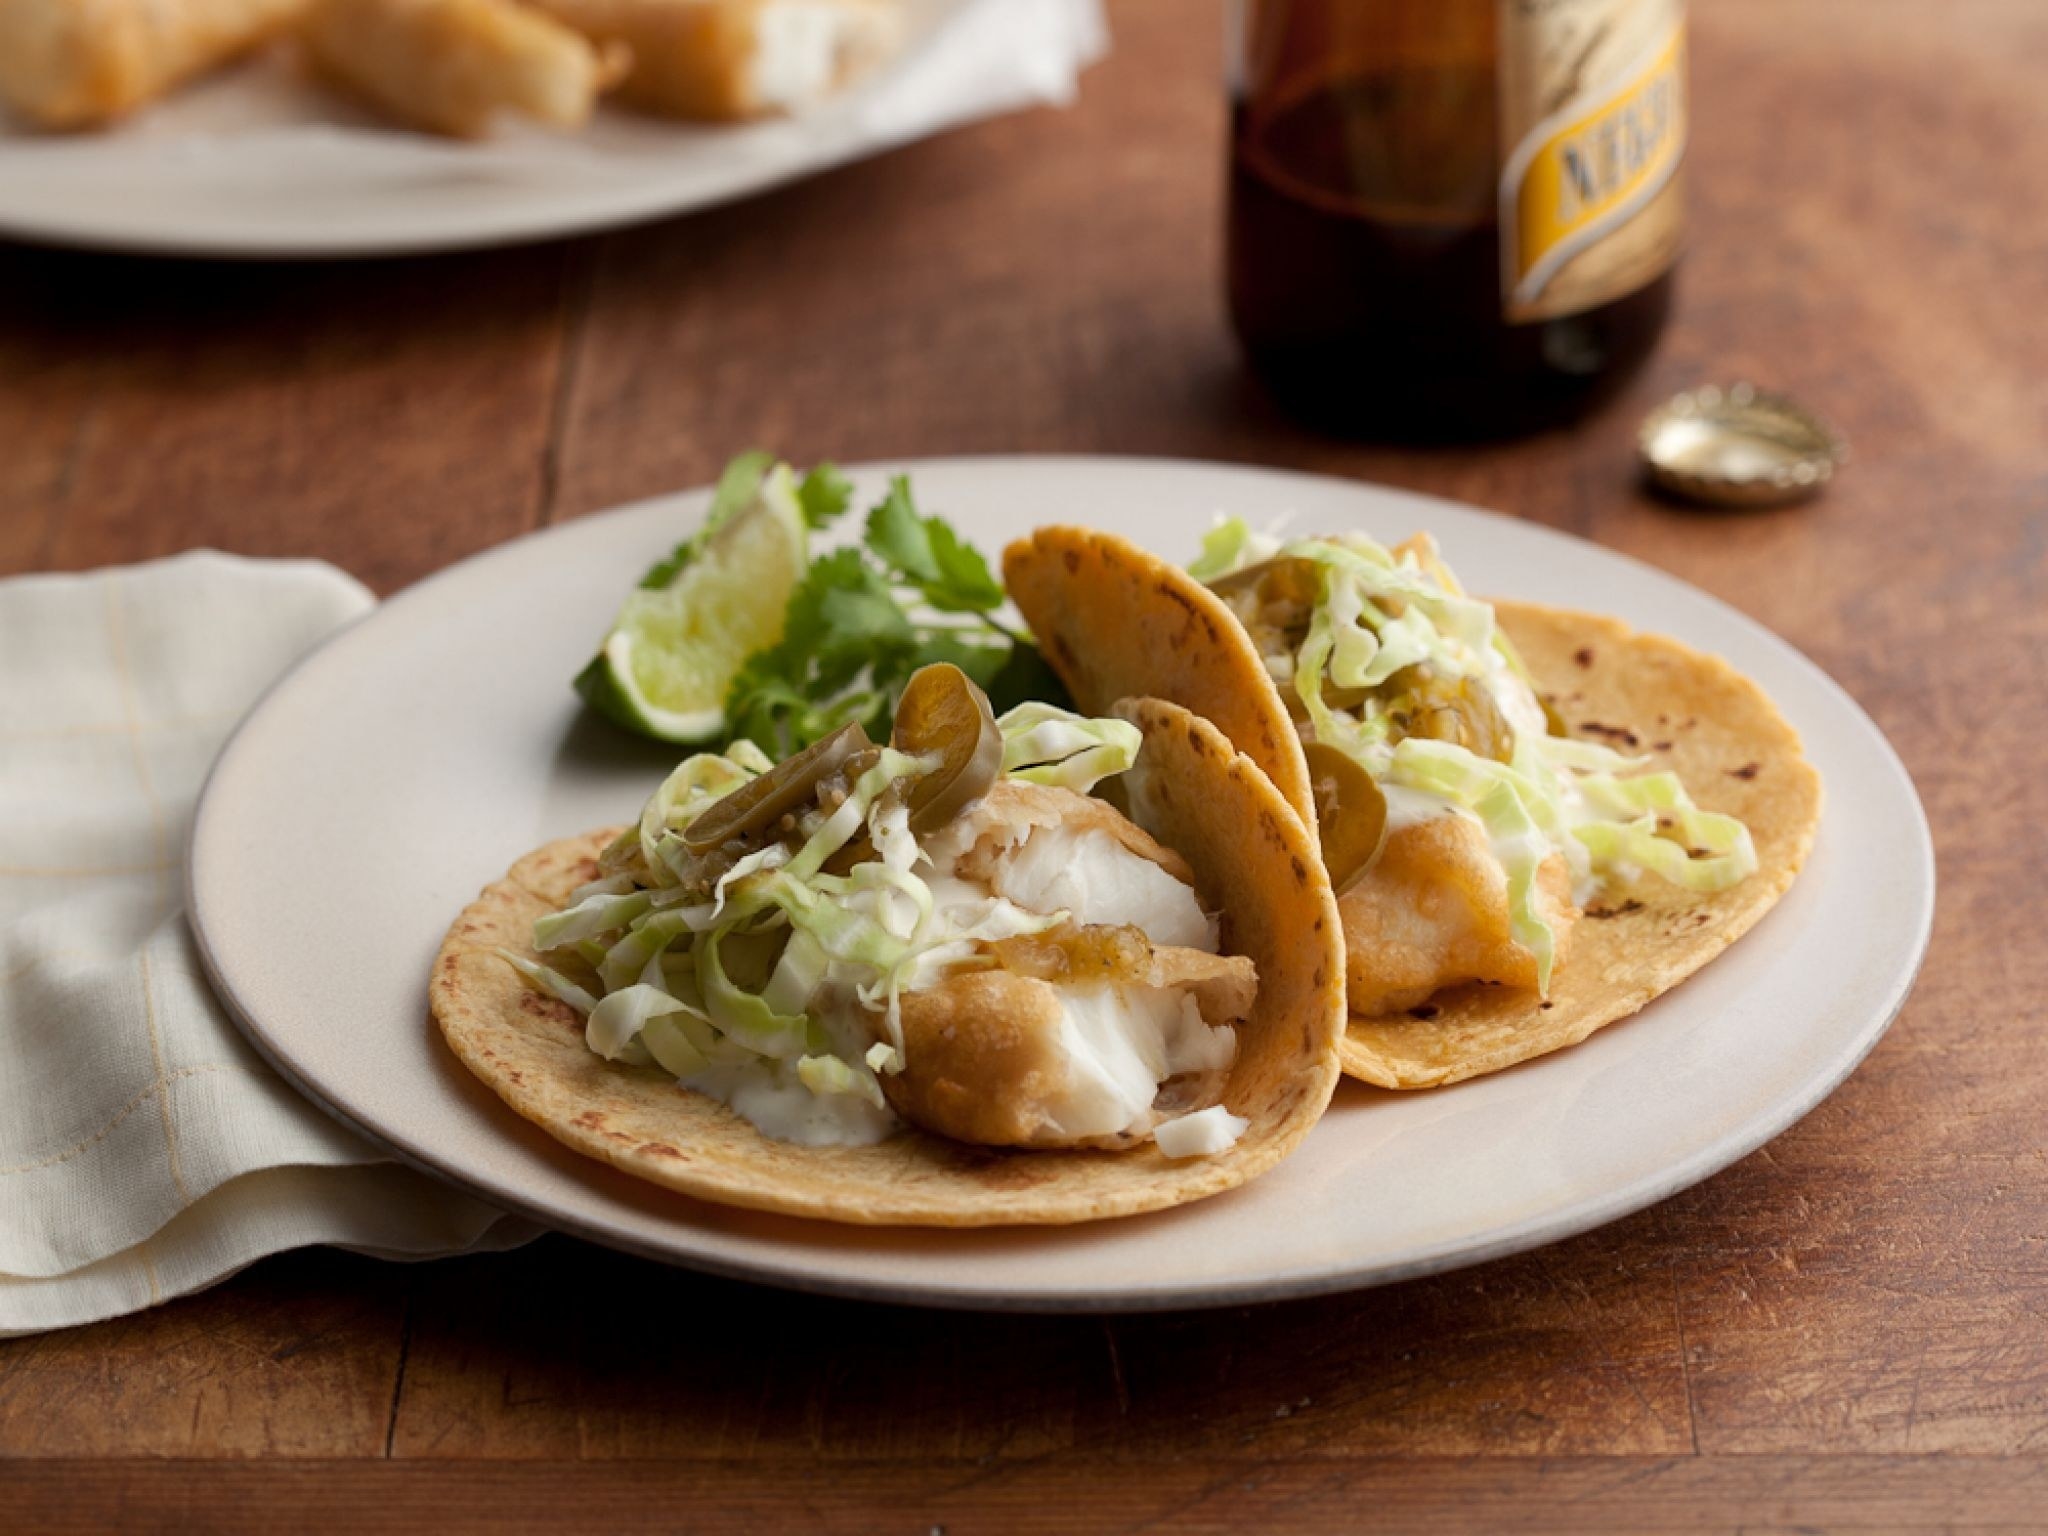 Baja style fish tacos with cabbage.